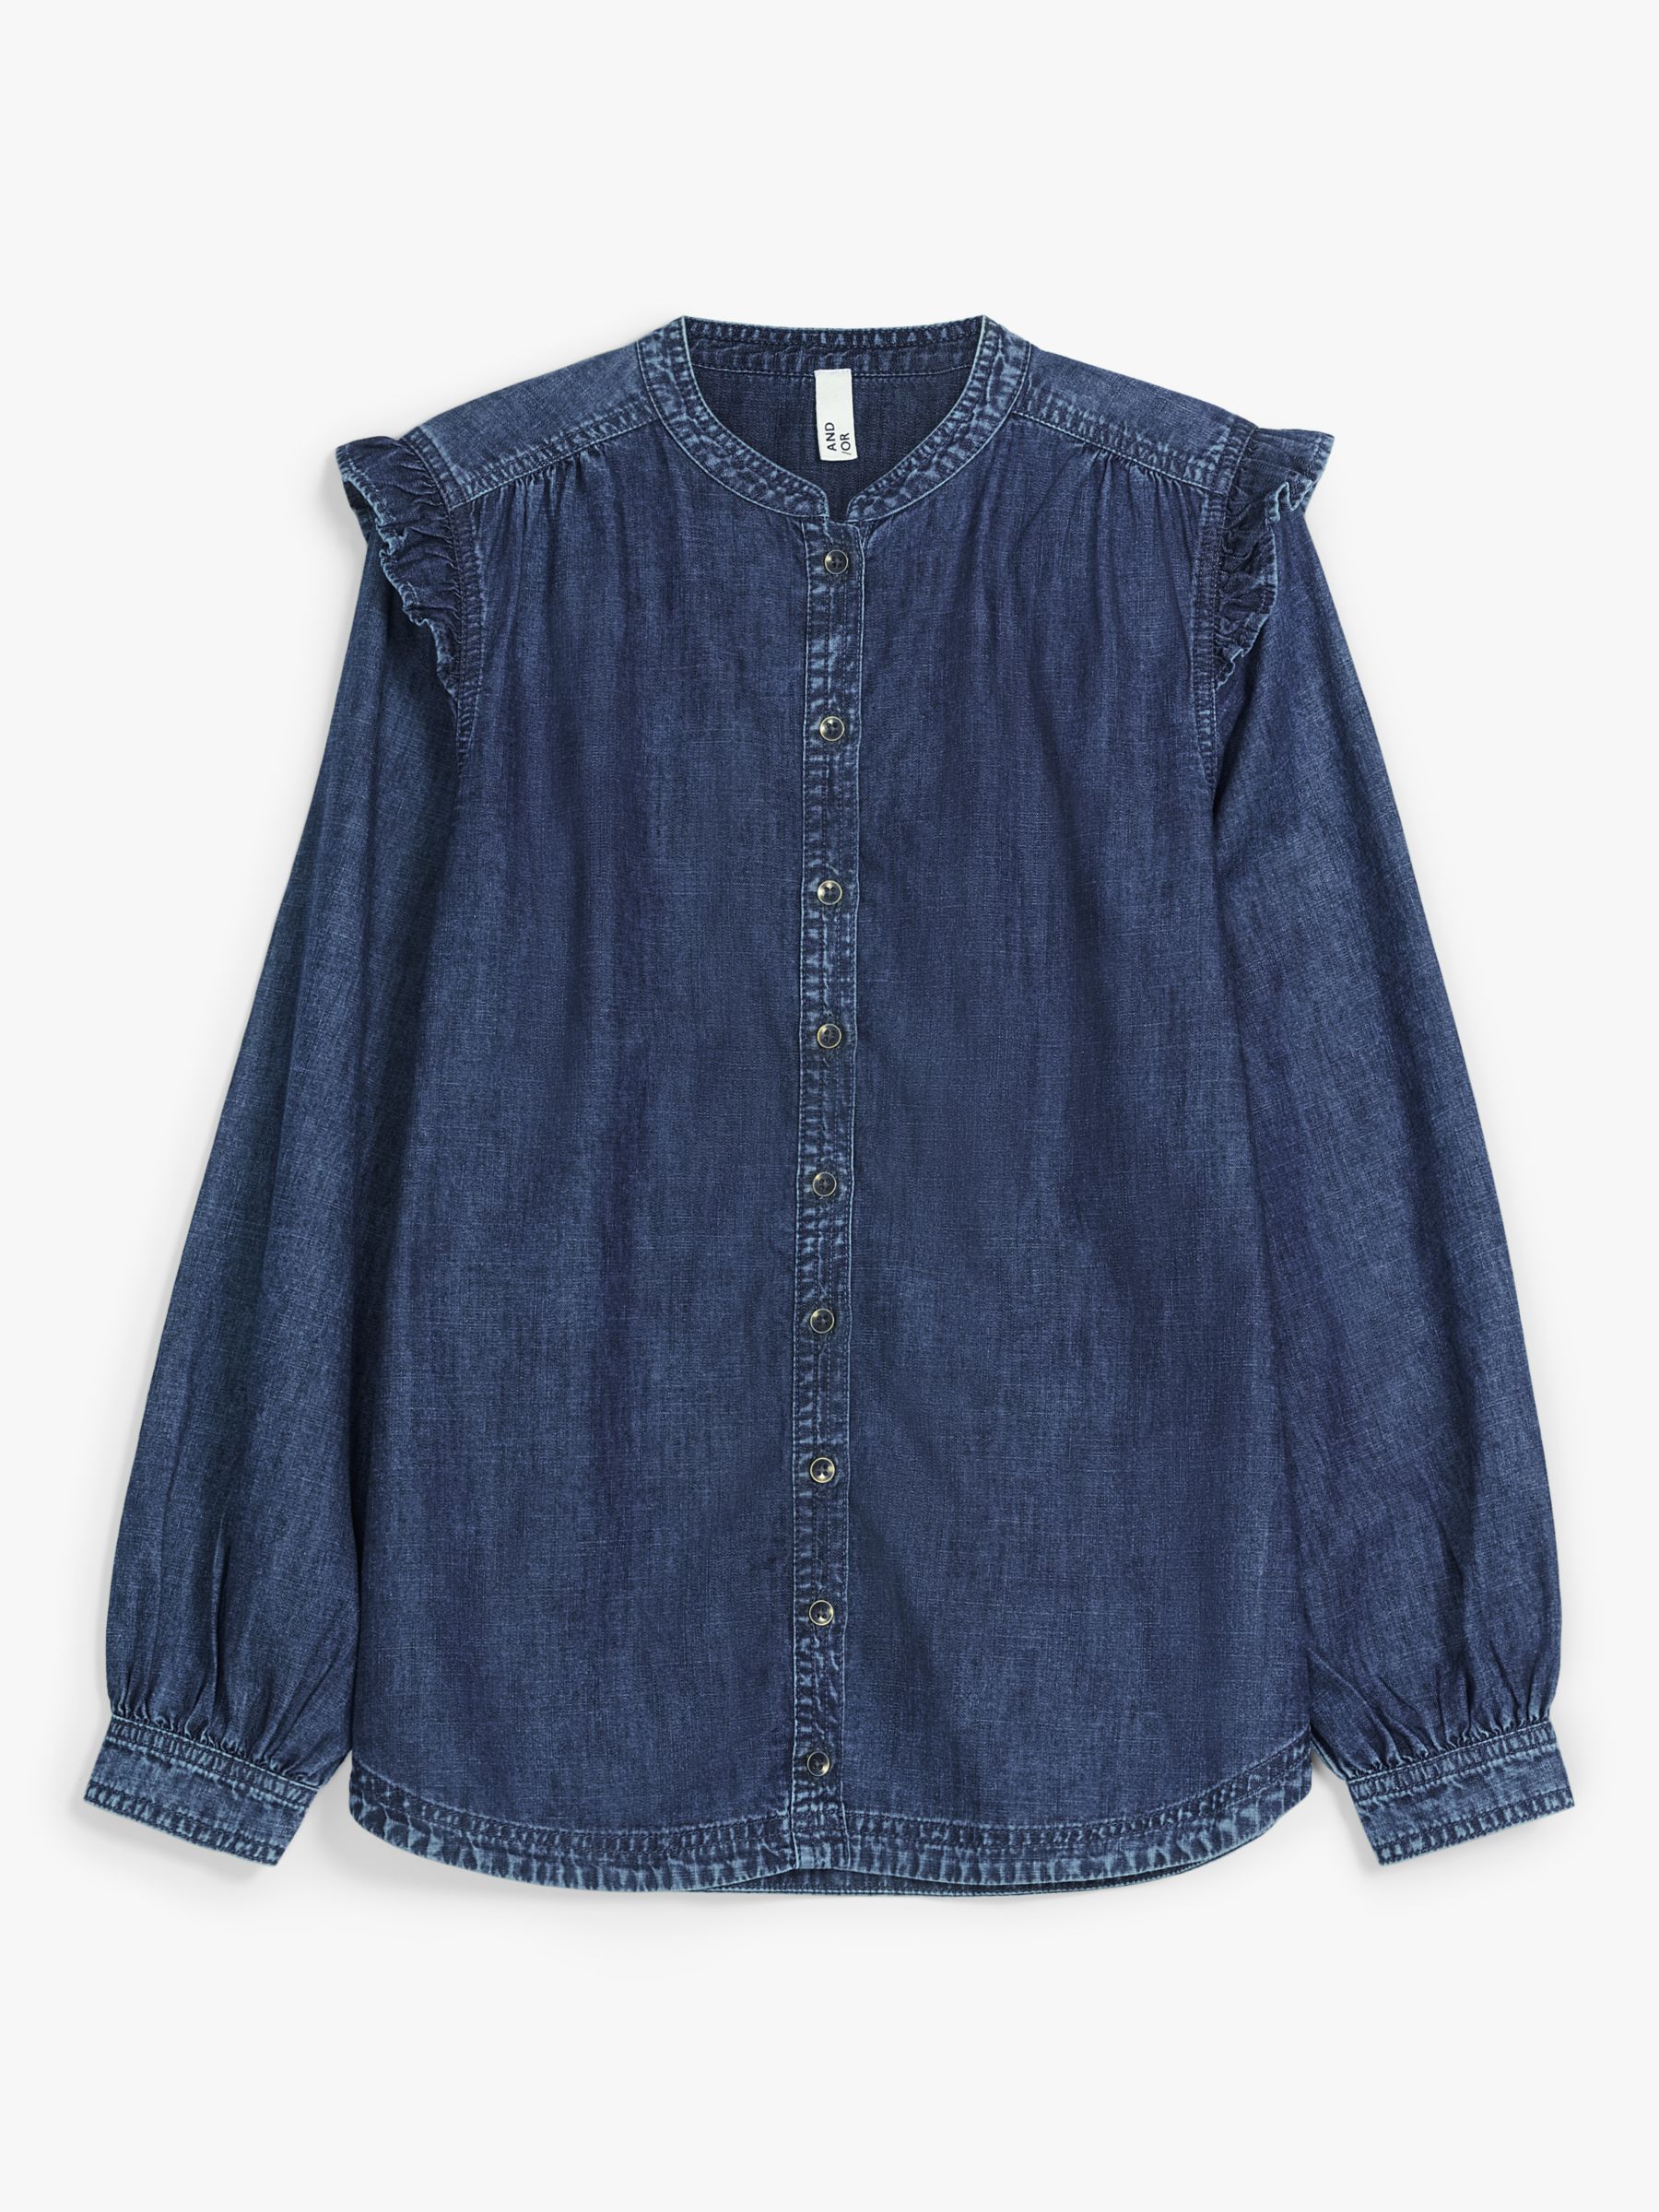 AND/OR Edith Denim Blouse, Blue